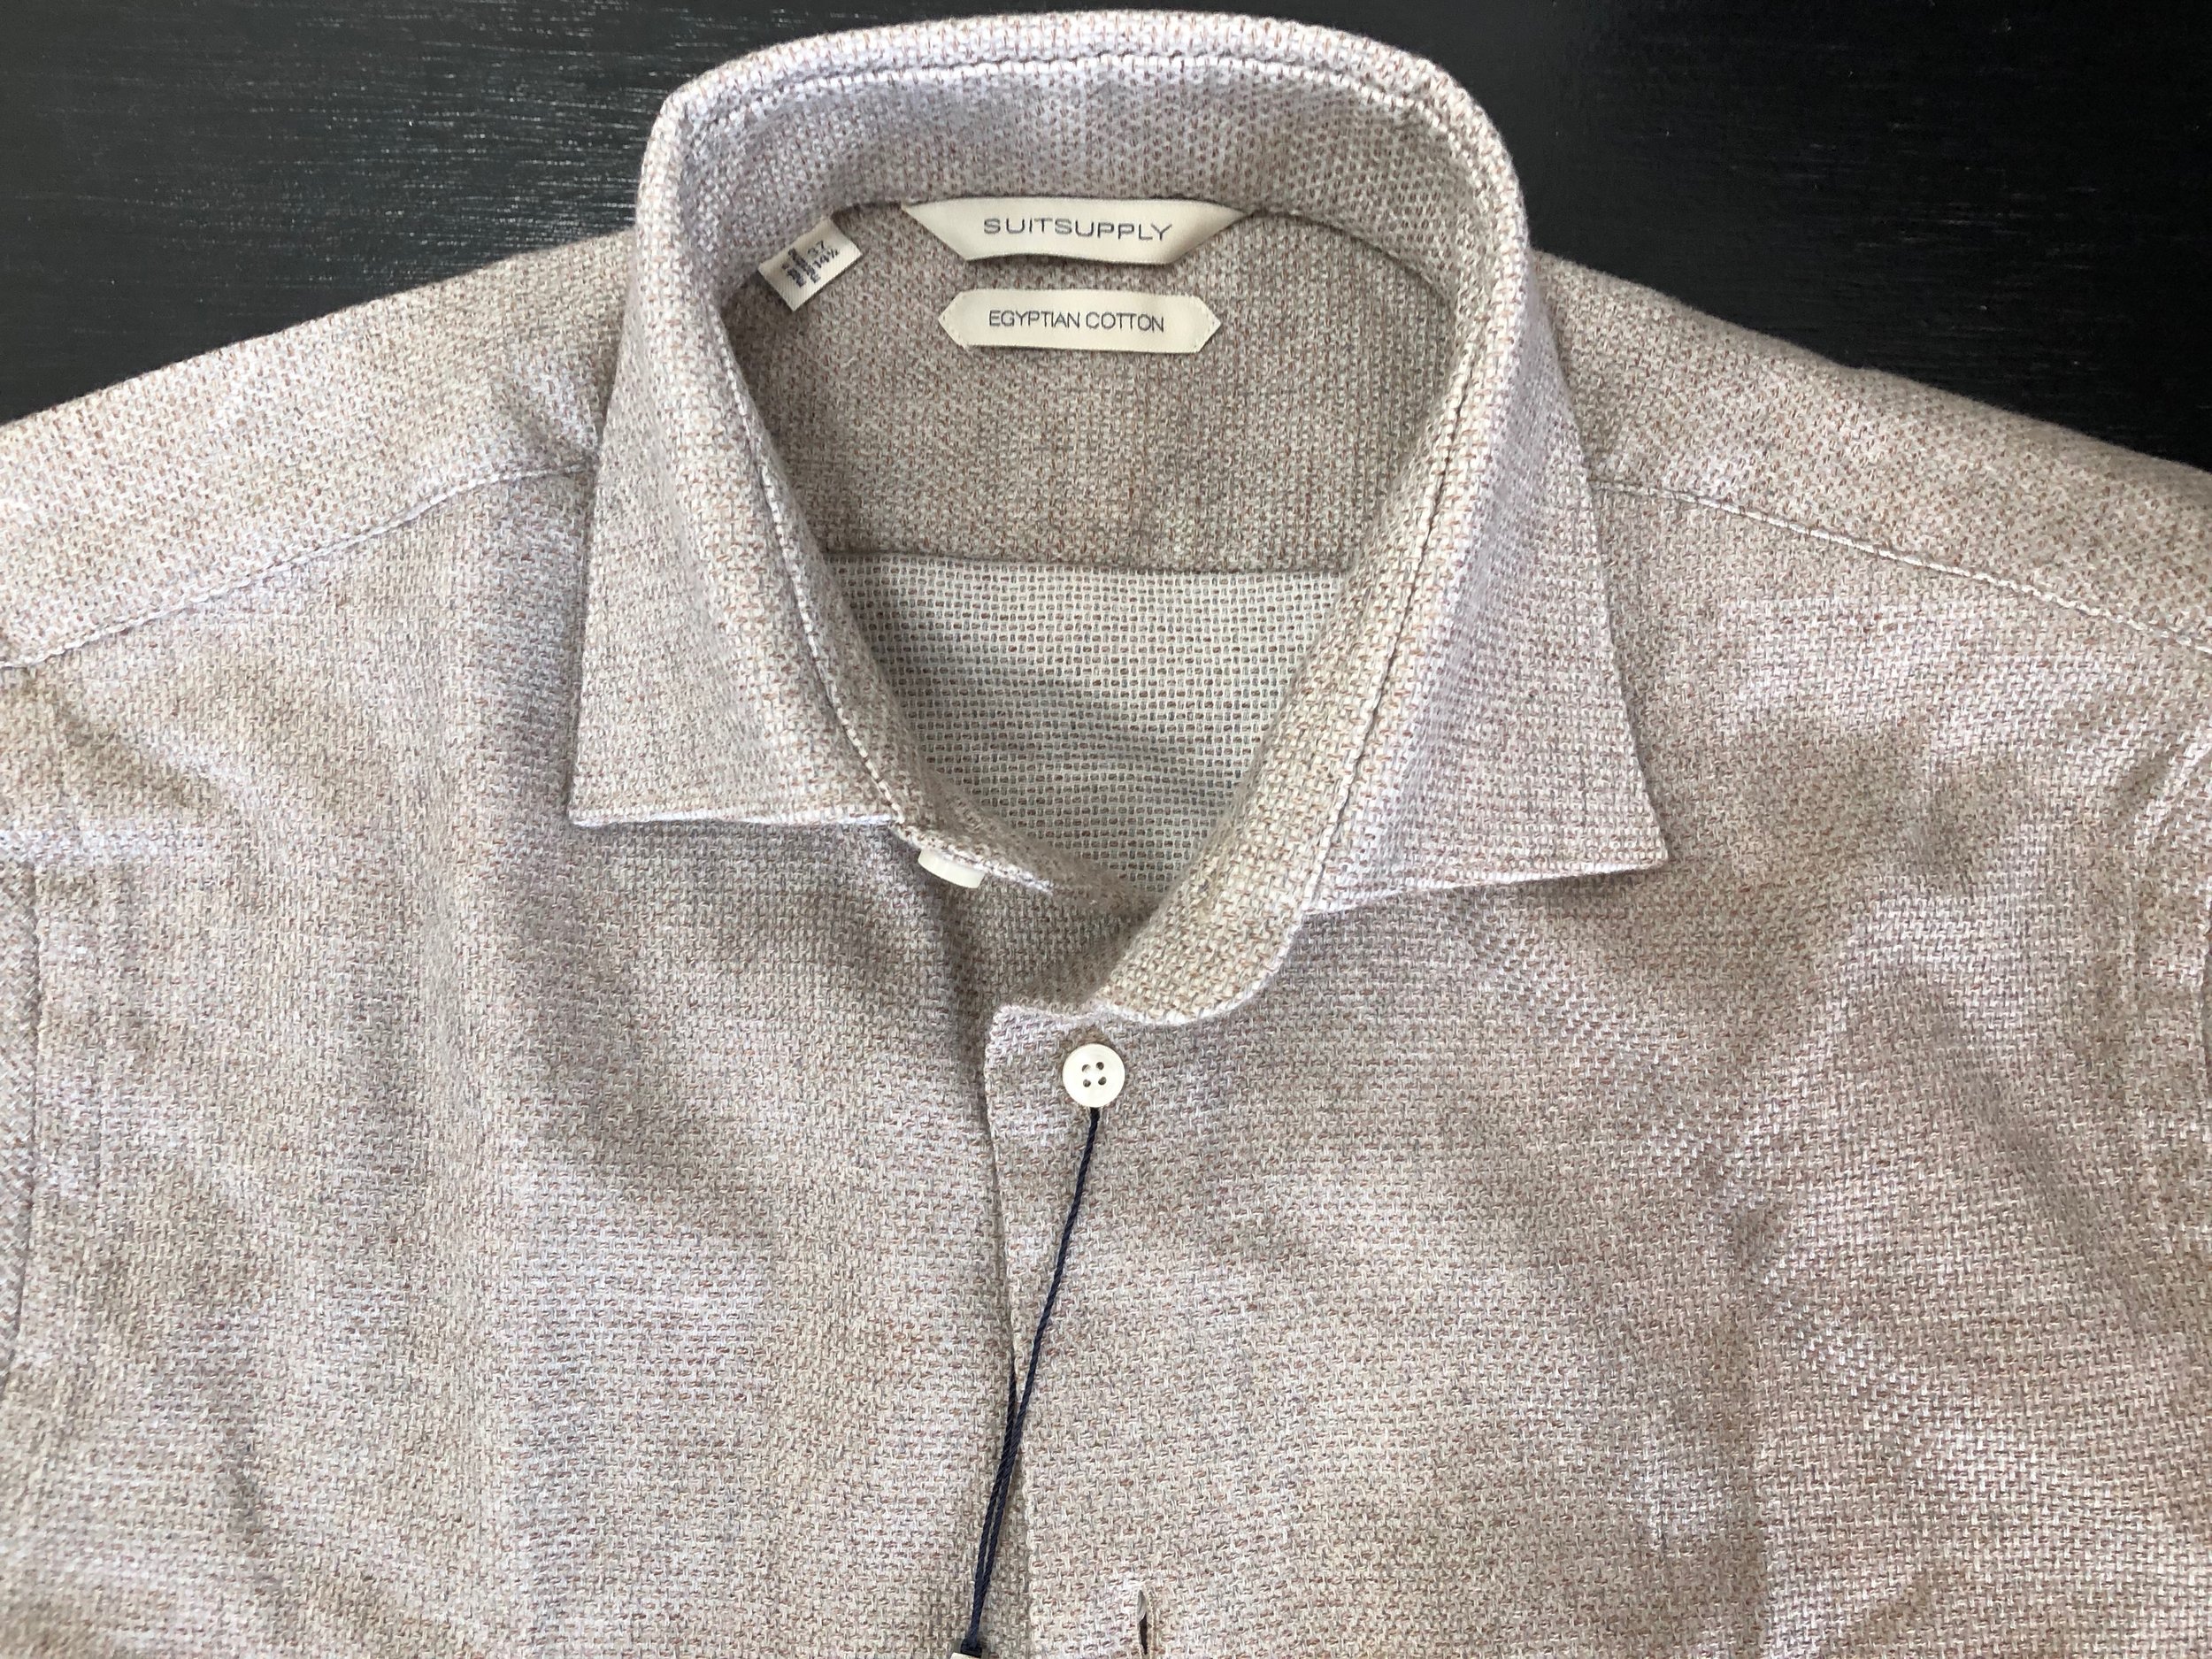 A Review of SuitSupply's Casual Shirts — The Peak Lapel